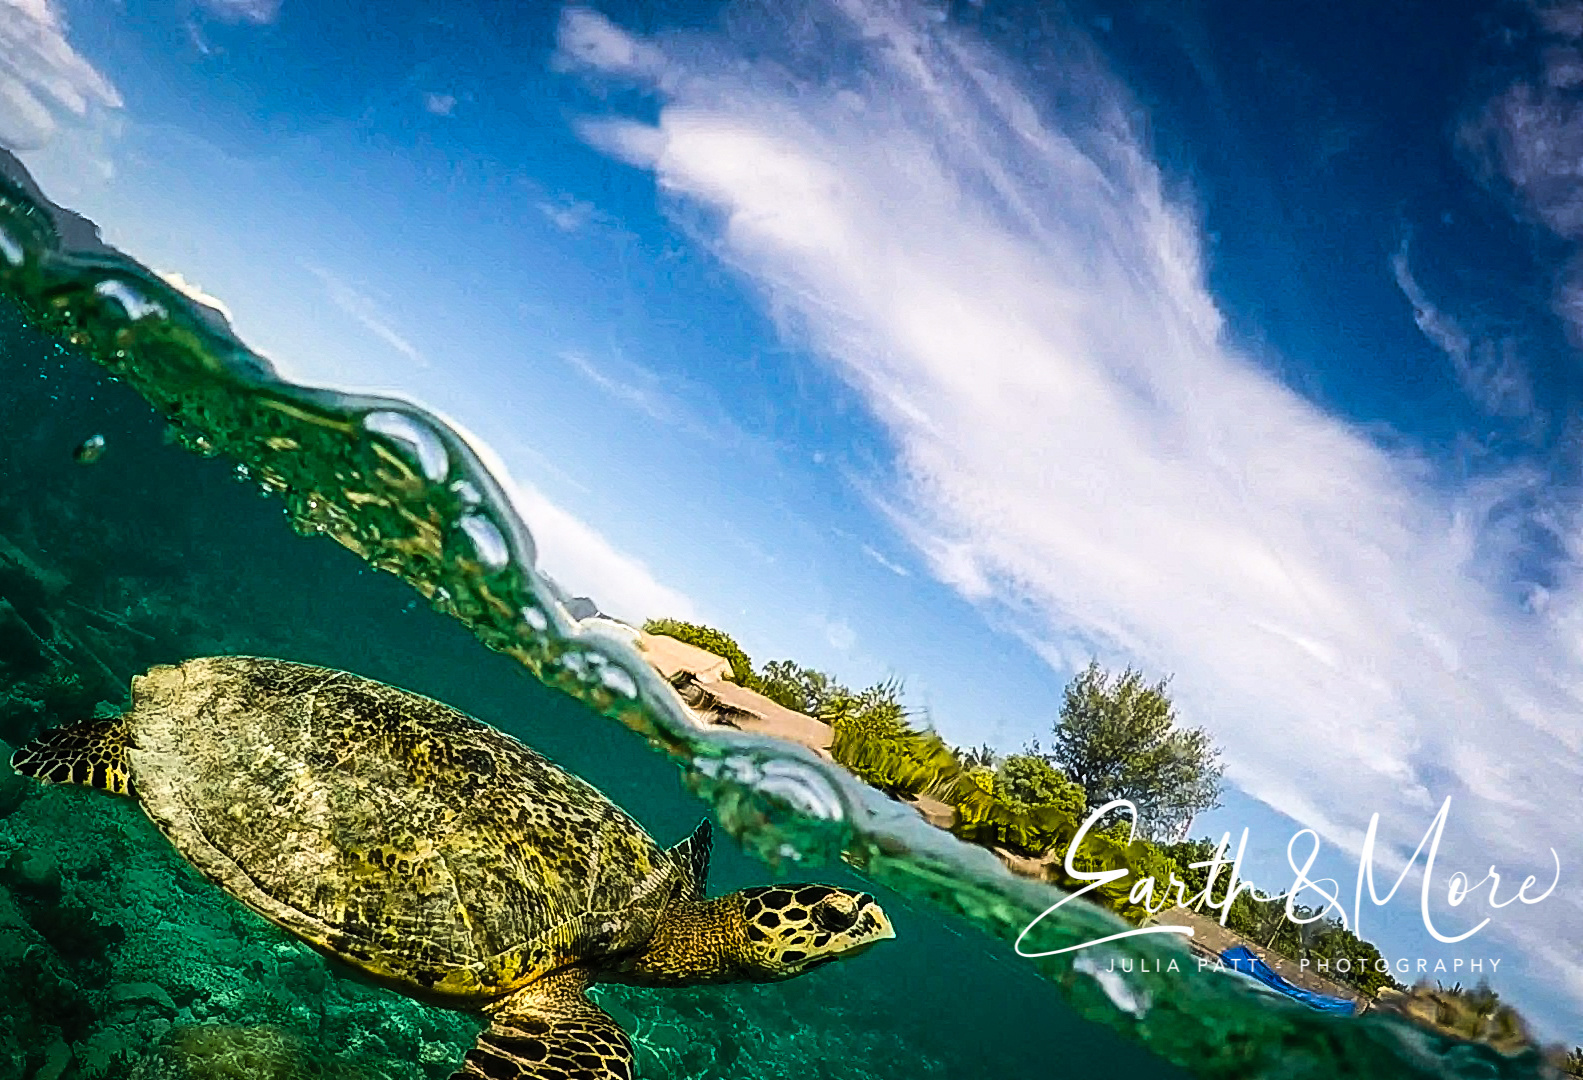 A turtle swimming at the beach of Gili Air